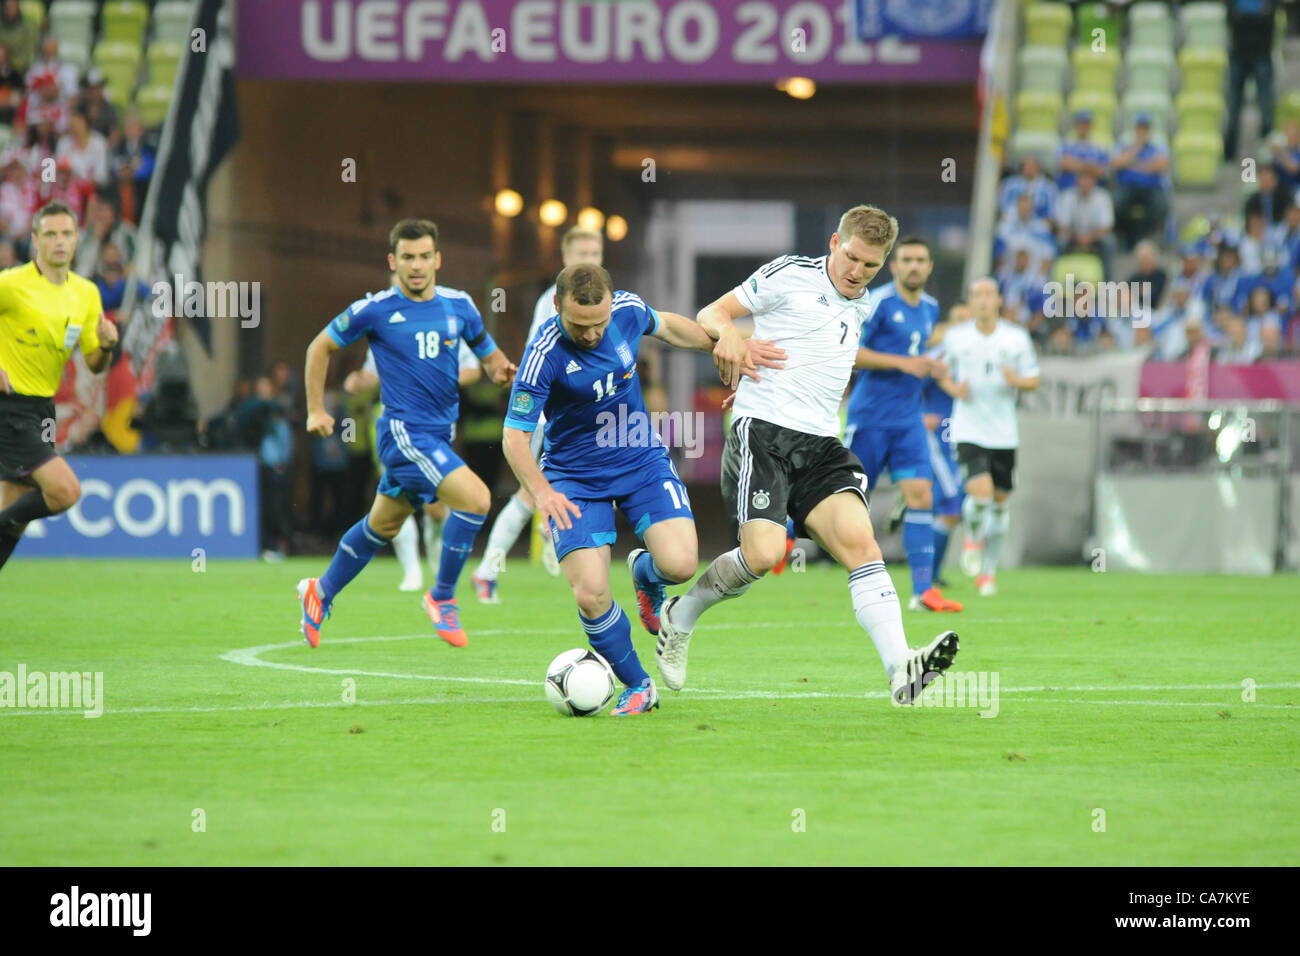 22.06.2012 , Gdansk, Poland. Dimitris Salpingidis (PAOK FC) Greece under pressure from Schwienstieger (Ger) during the European Championship Quarter Final game between Greece v Germany from the Gdansk Stadium. Stock Photo